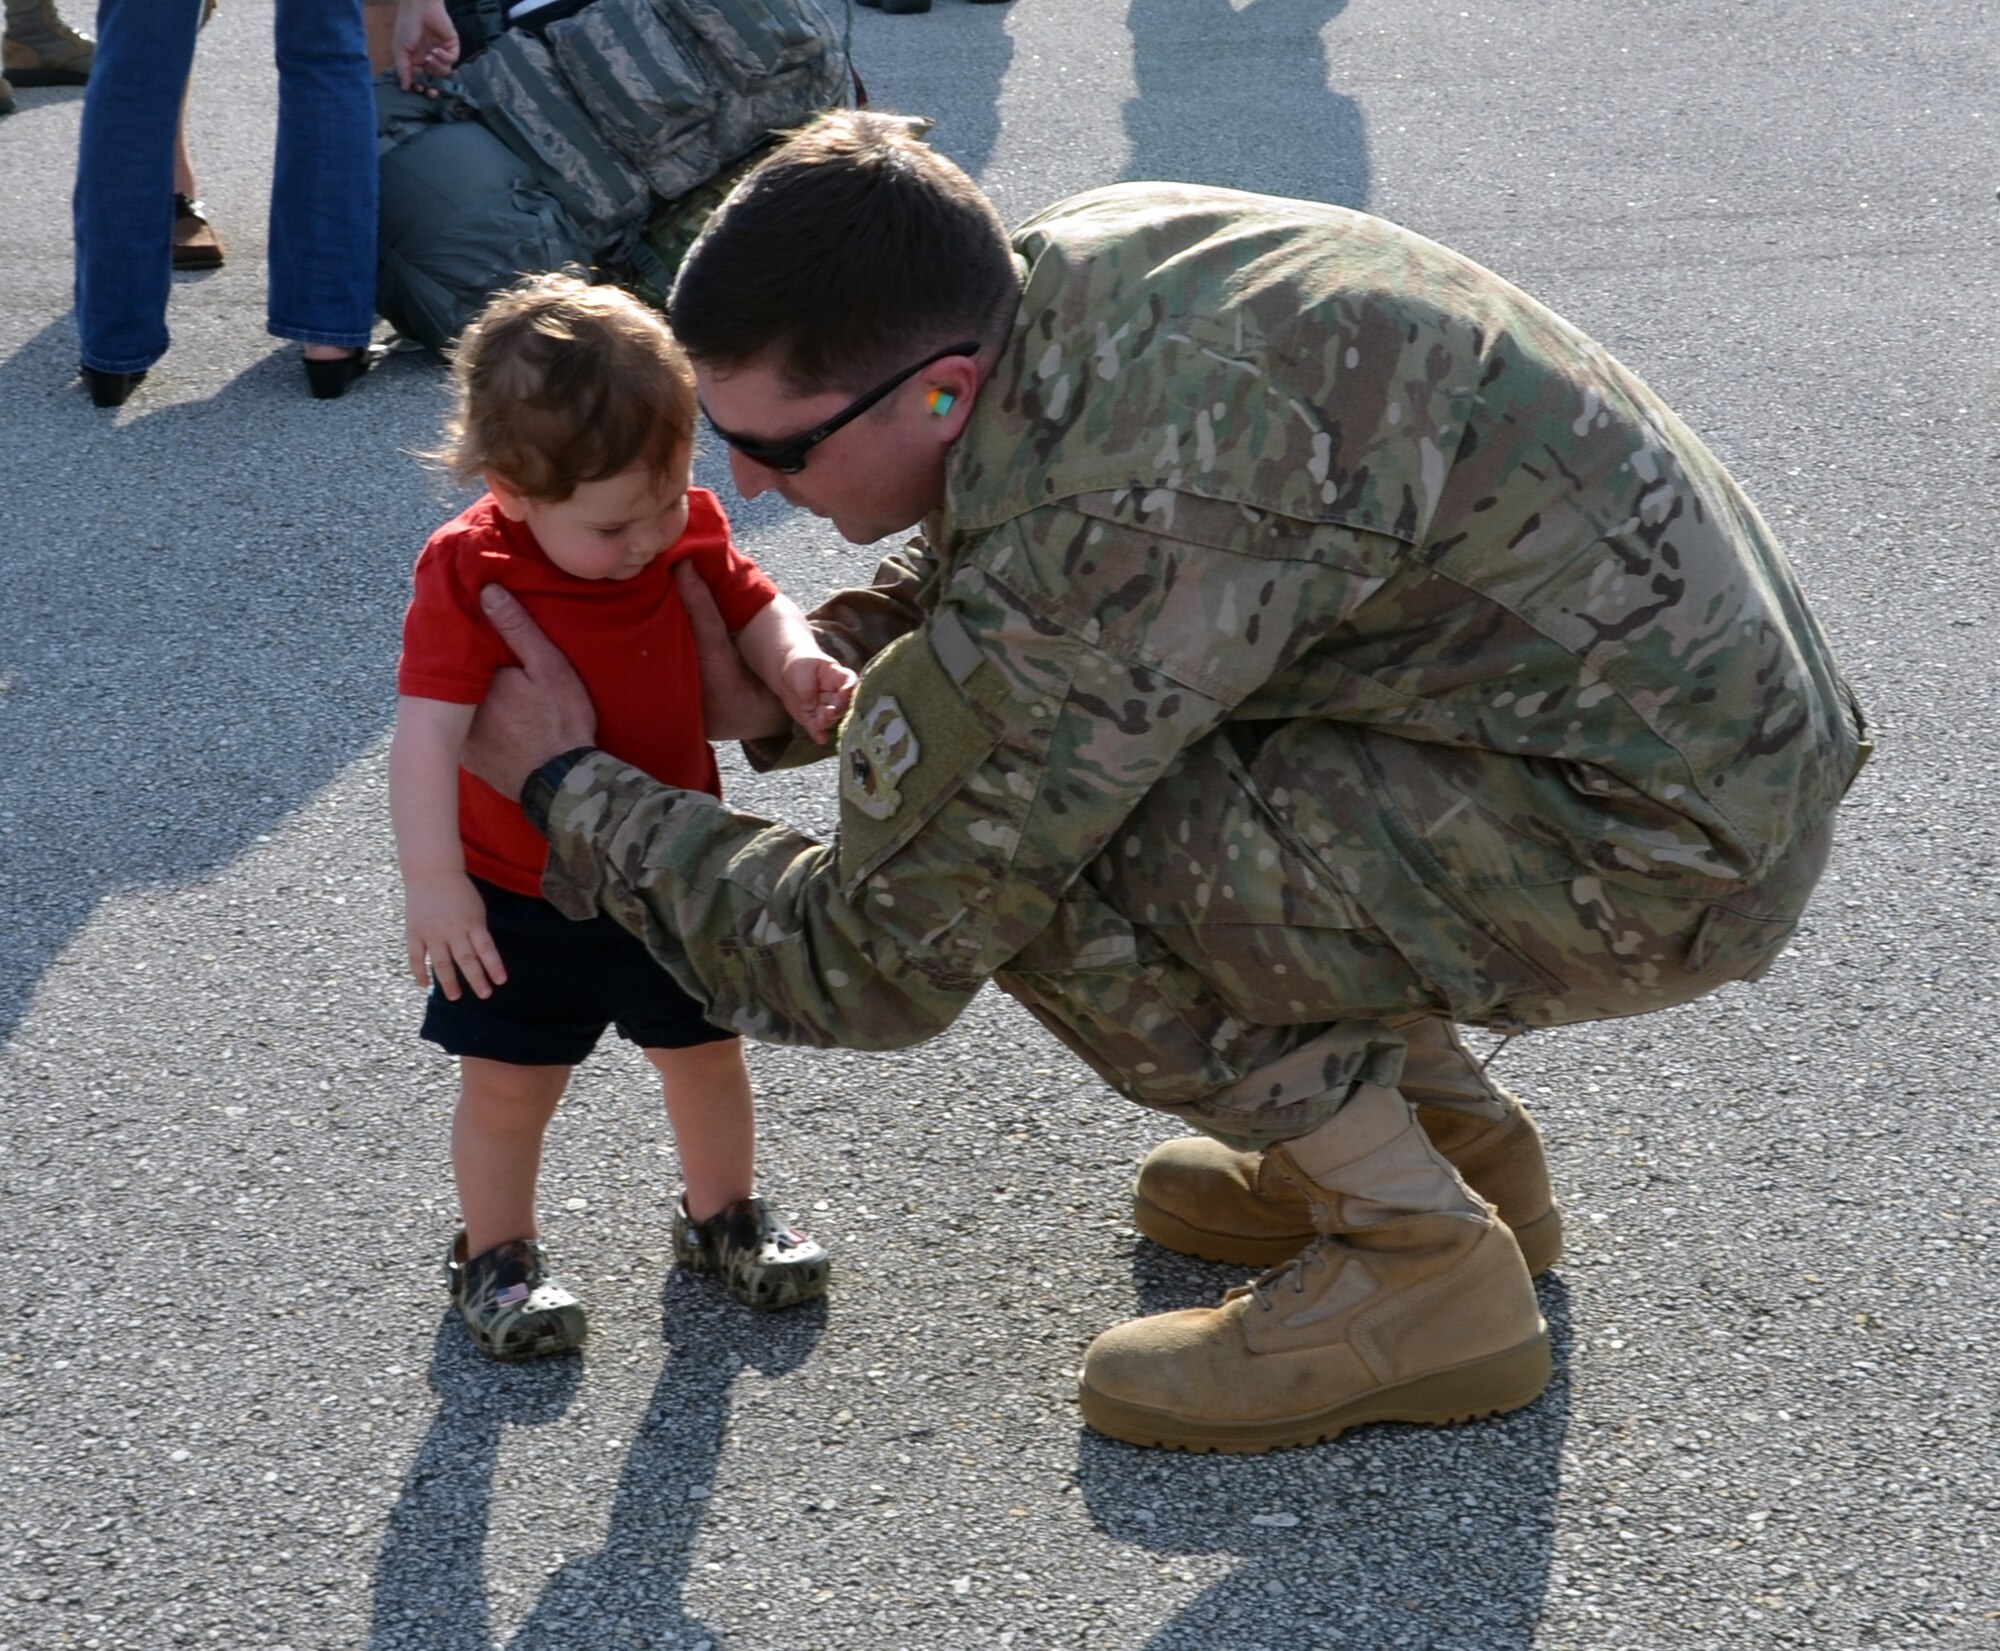 Staff Sgt. Gordon Grooms, a reservist from the 920th Aircraft Maintenance Squadron, greets his son at Patrick Air Force Base, Fla., upon return from a four-month deployment Feb. 8, 2017. Approximately 50 wing reservists were welcomed home by friends, family members and fellow Airmen on the Patrick AFB flight line. (U.S. Air Force photo by 1st Lt. Anna-Marie Wyant)